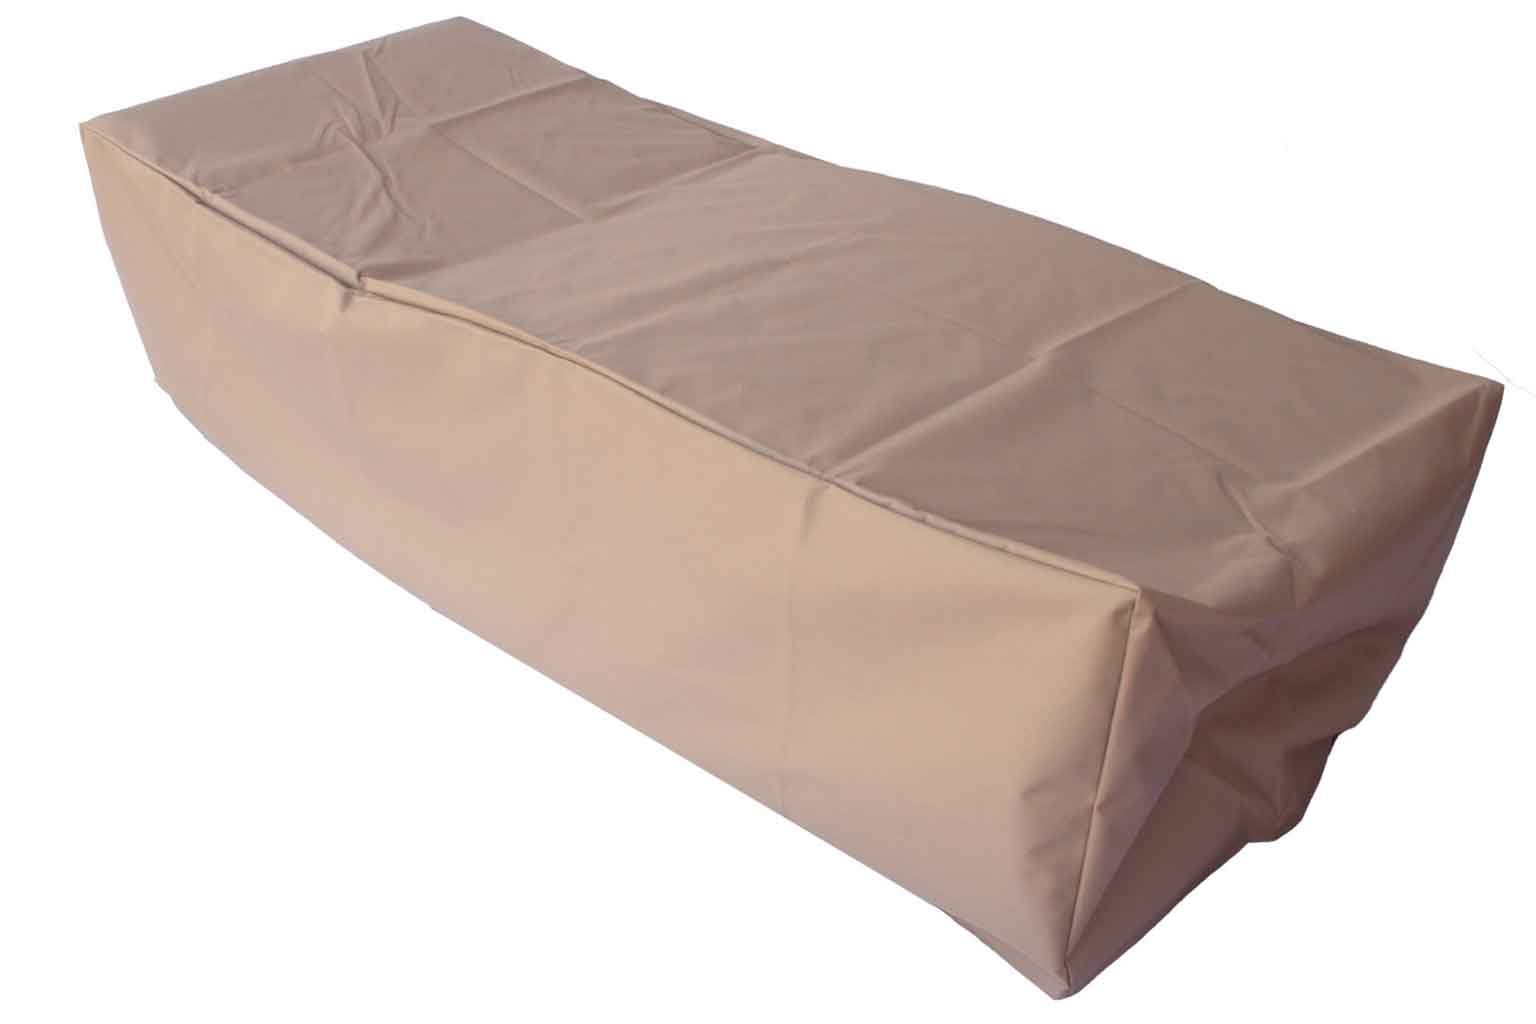 Furniture Covers Chaise Lounge Patio Furniture Cover 78 8 X 29 9 X 15 7 1 2000x2000 ?v=1534896196